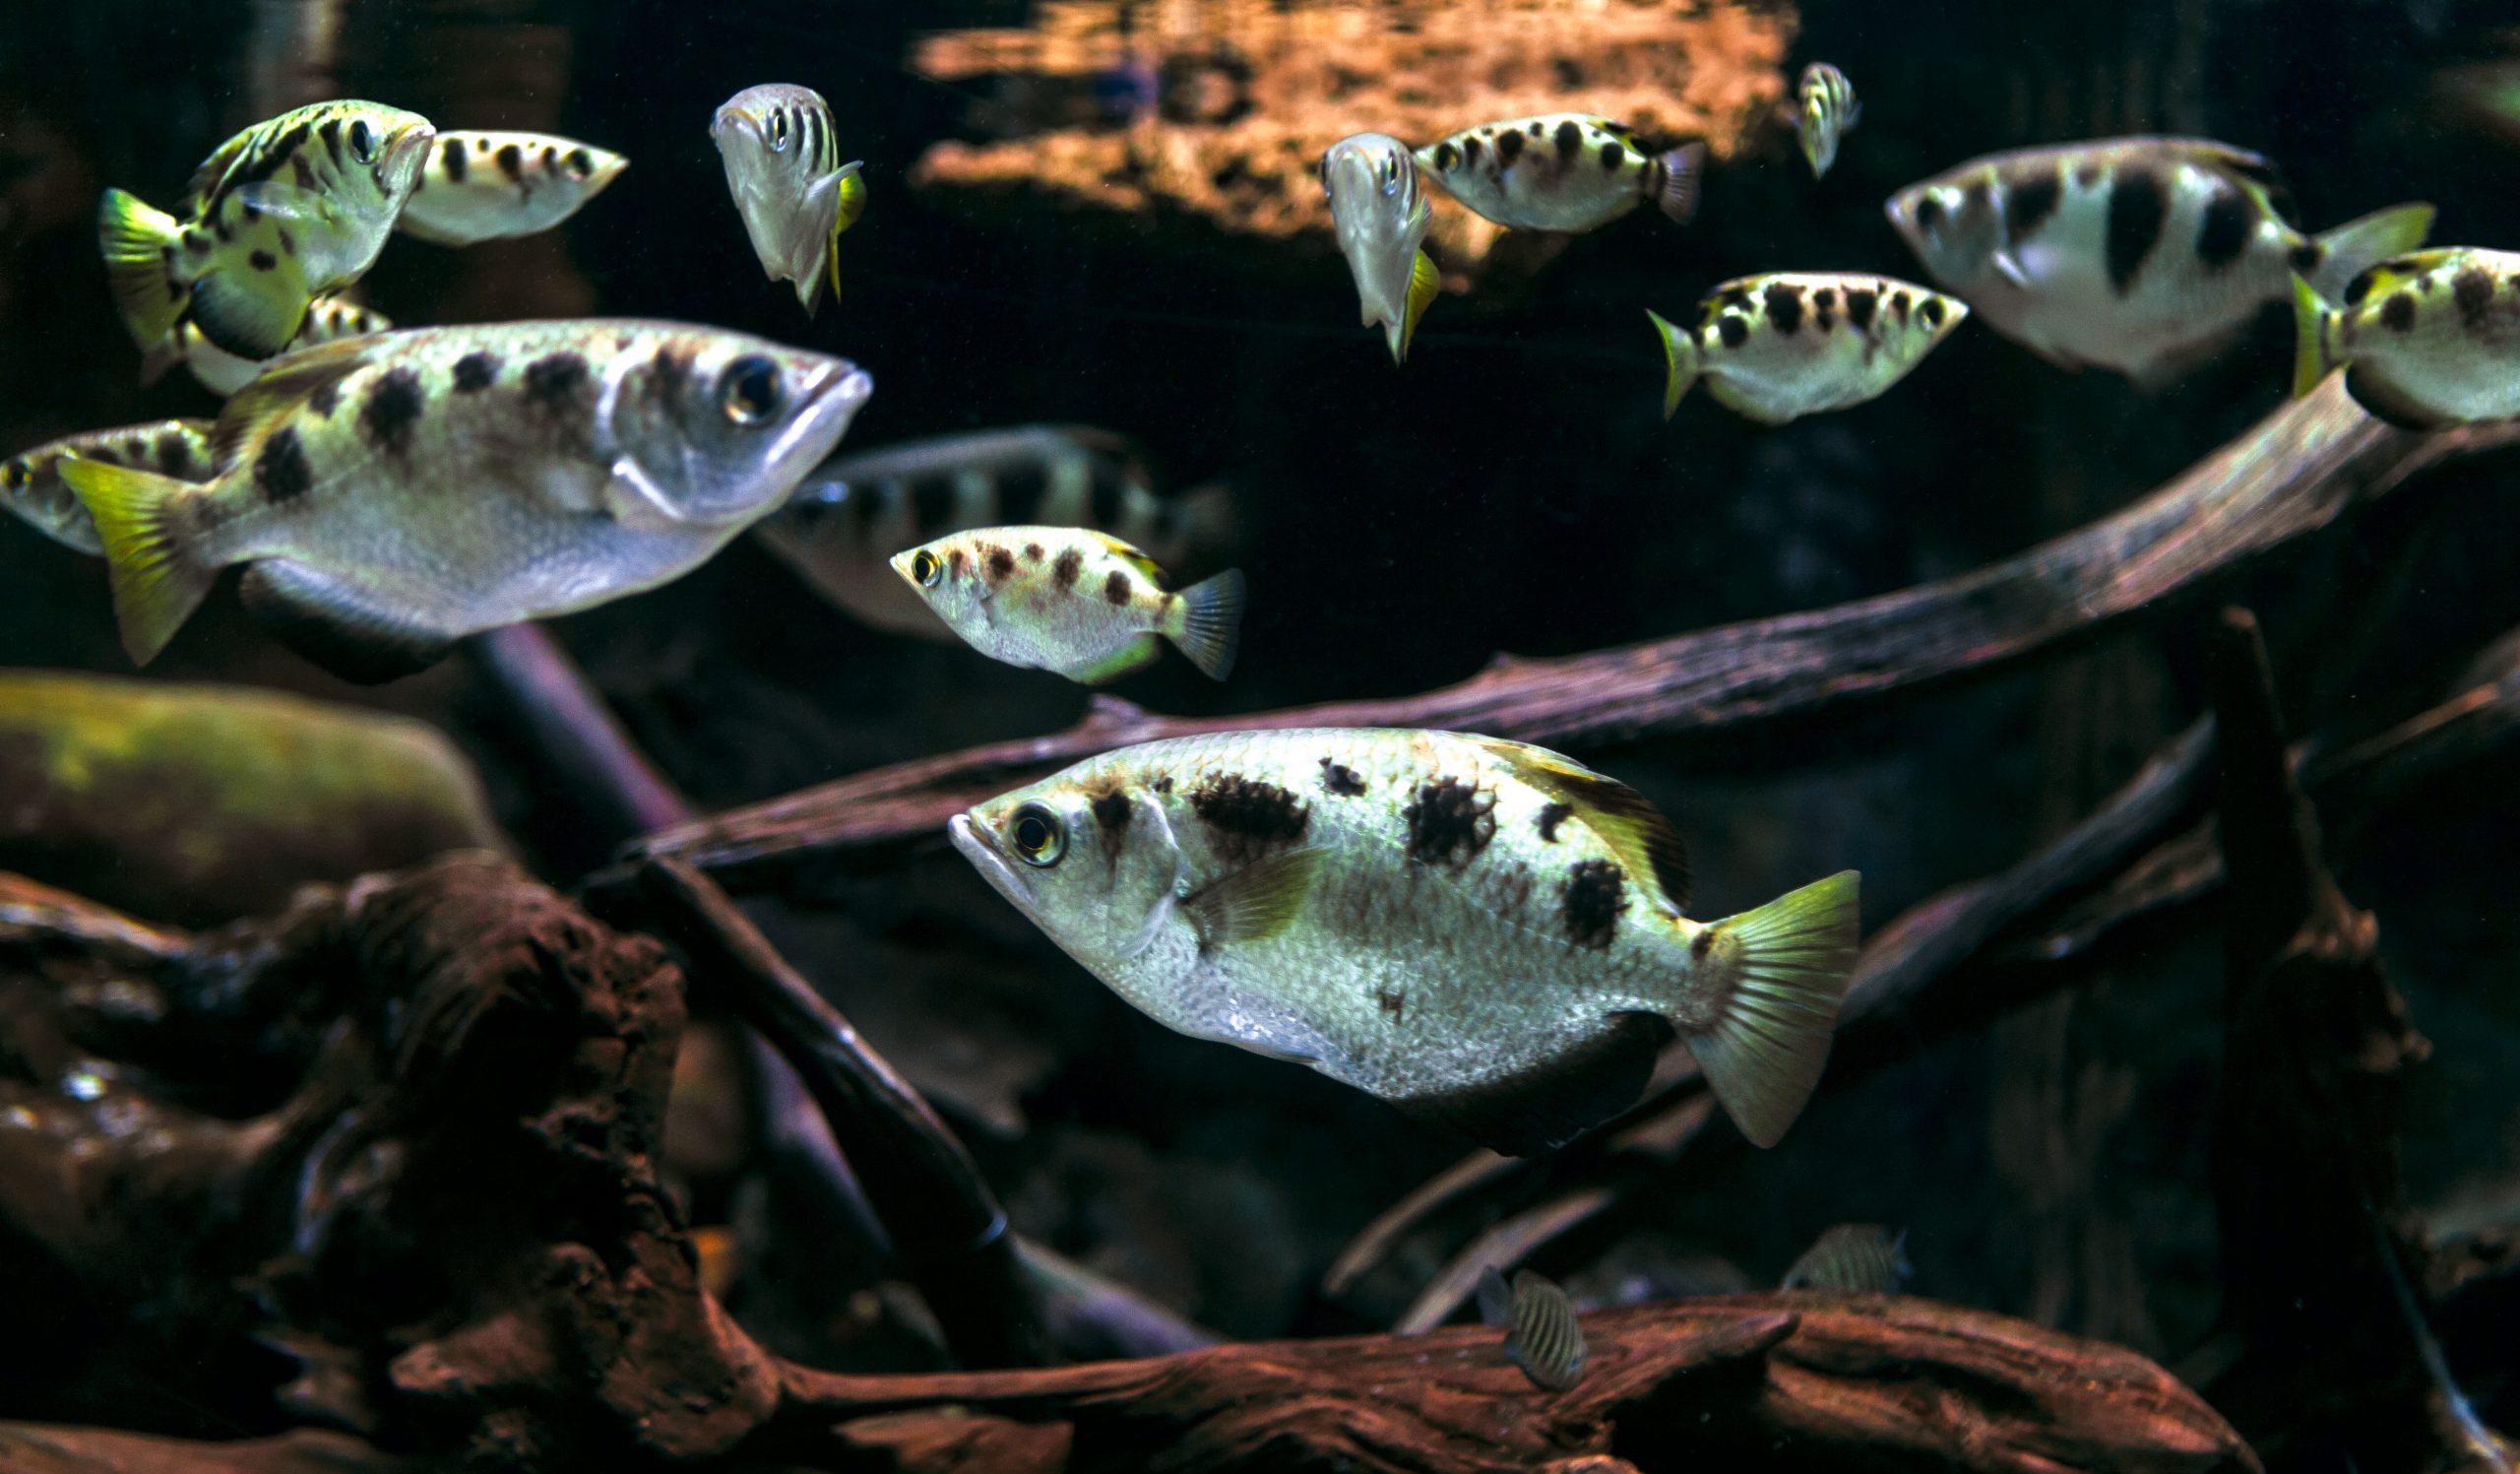 Archerfish can count - that is the conclusion of biologists that managed to train several specimen. Credit: DepositPhotos